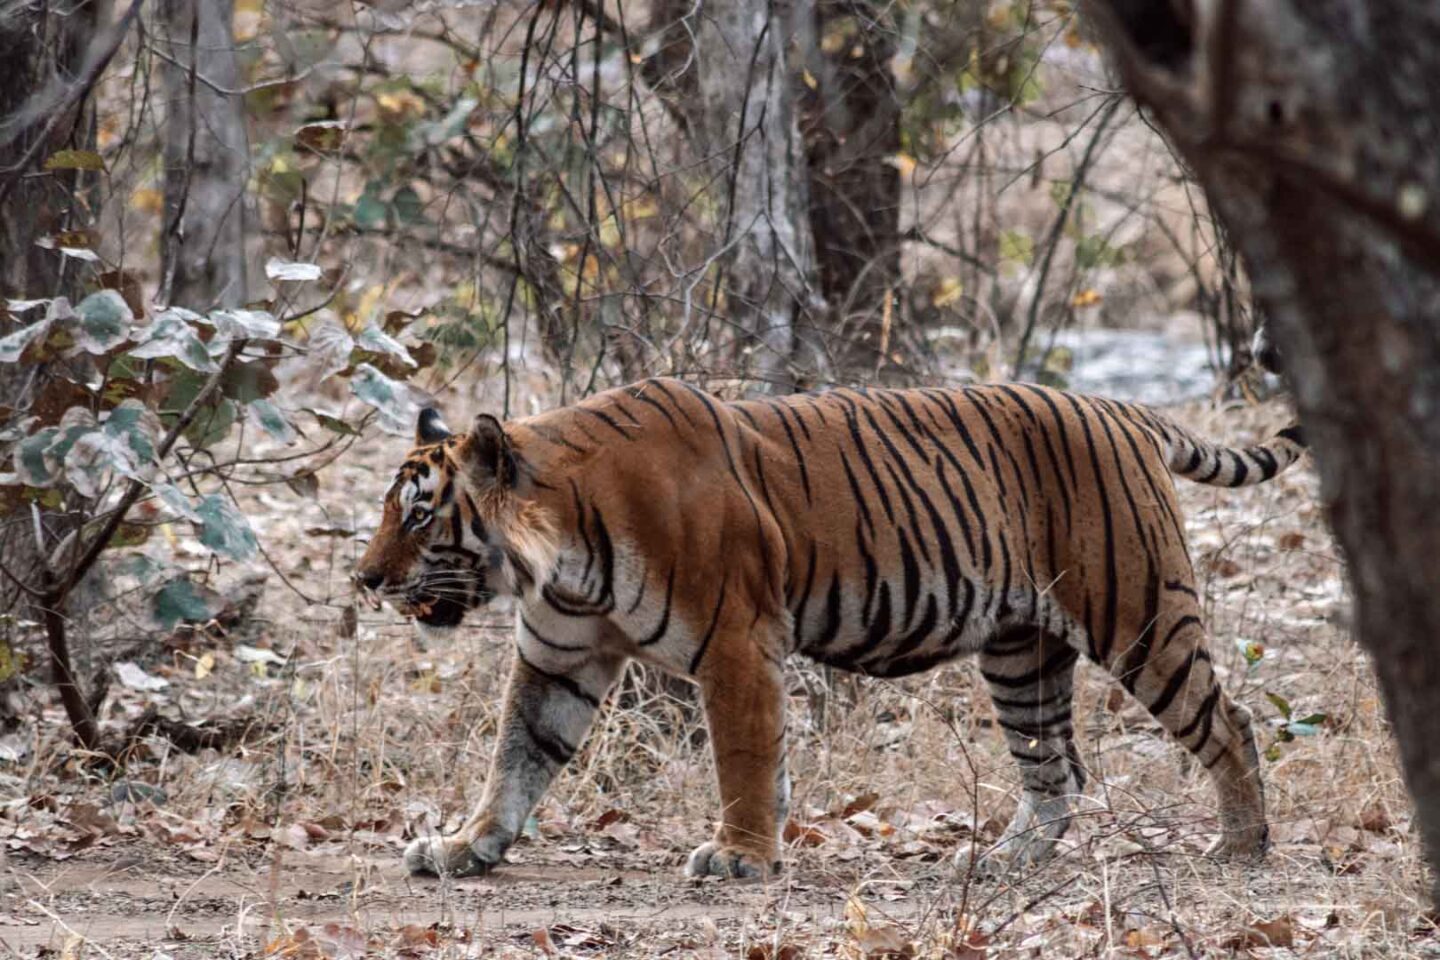 Wild tigers in Ranthambore National Park, India